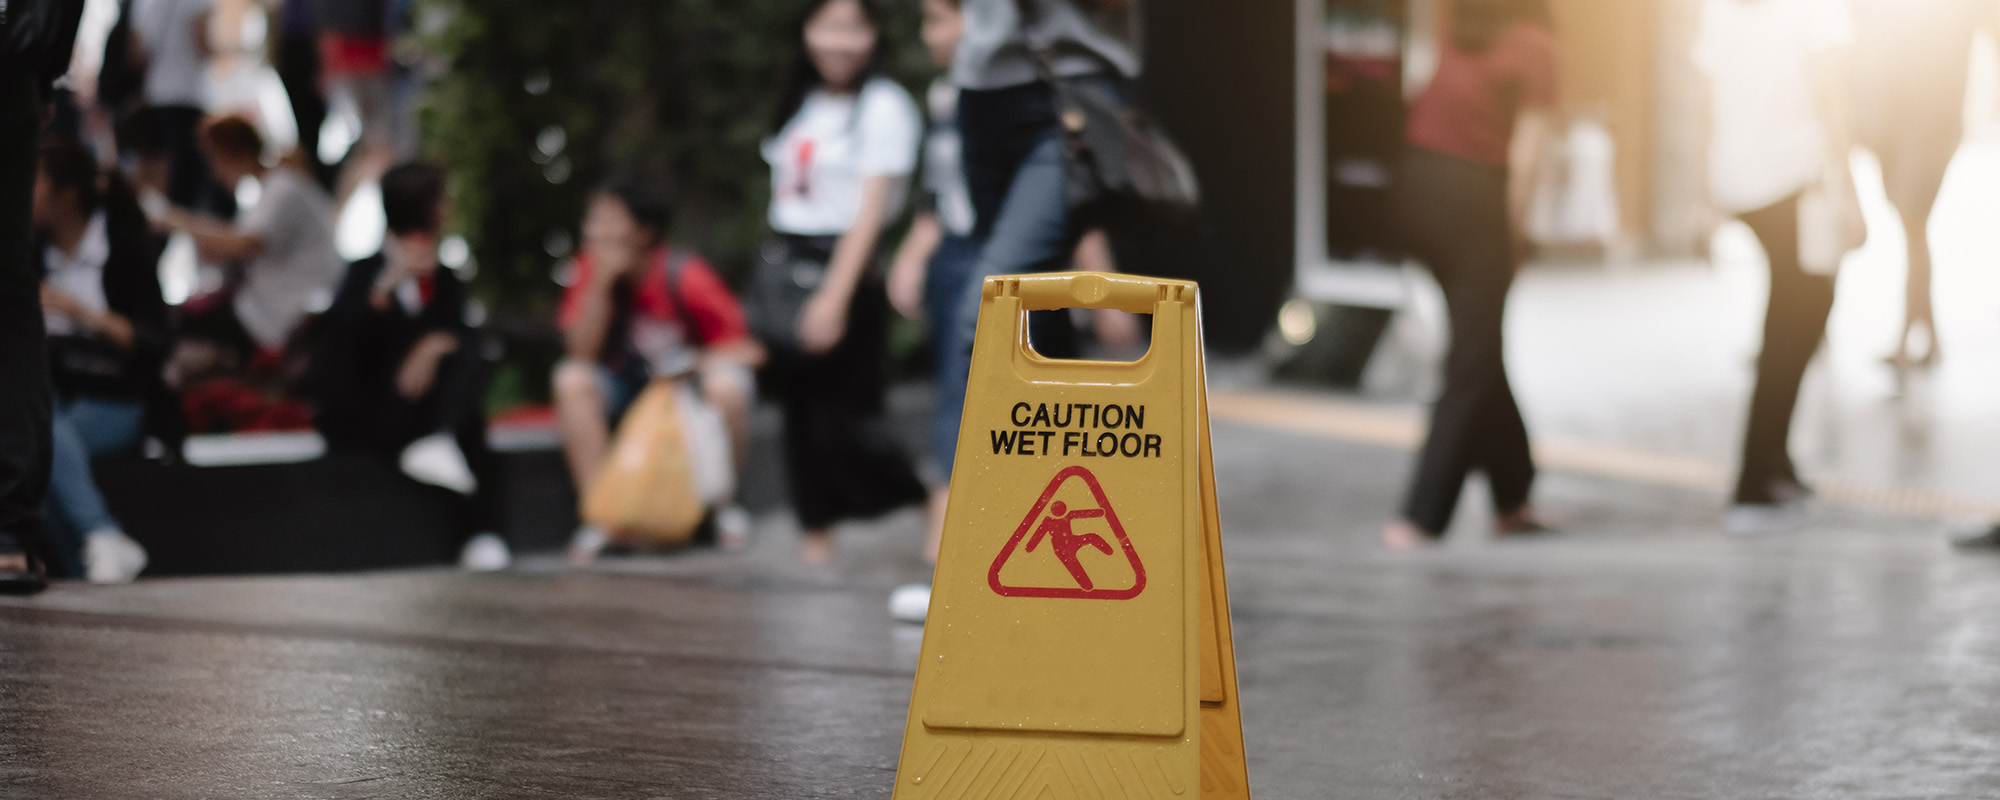 sign showing warning of caution wet floor